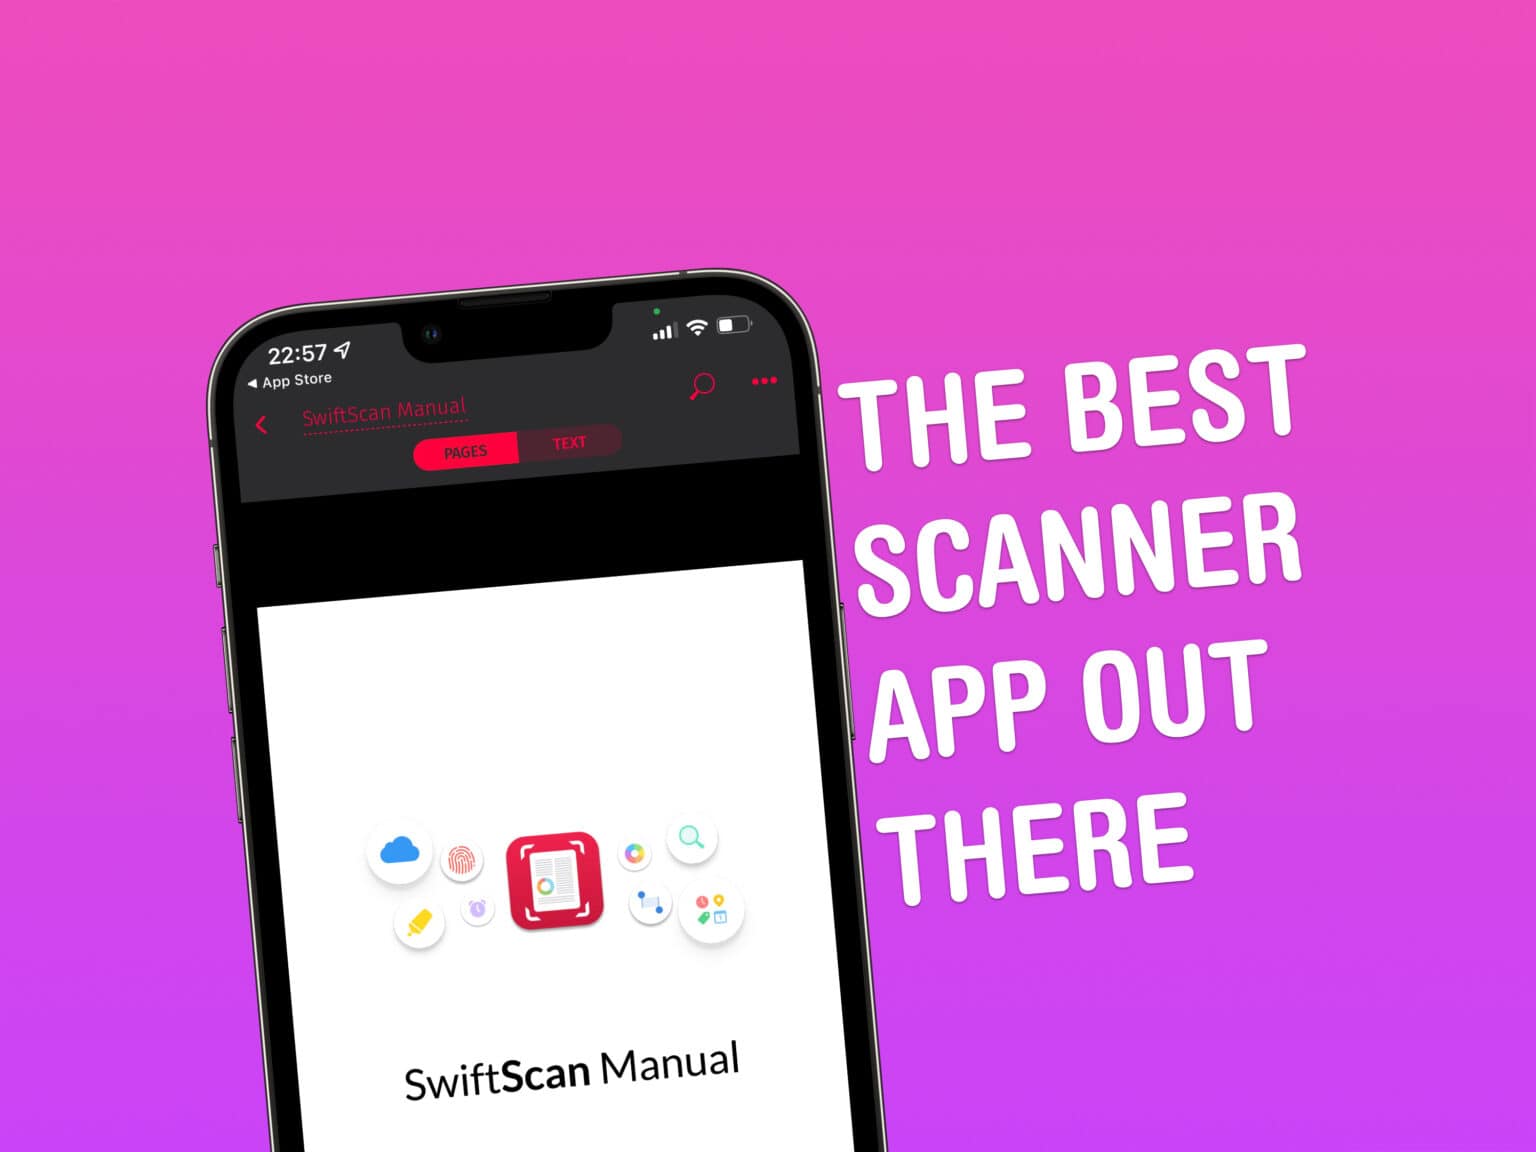 SwiftScan is the best scanner app out there.